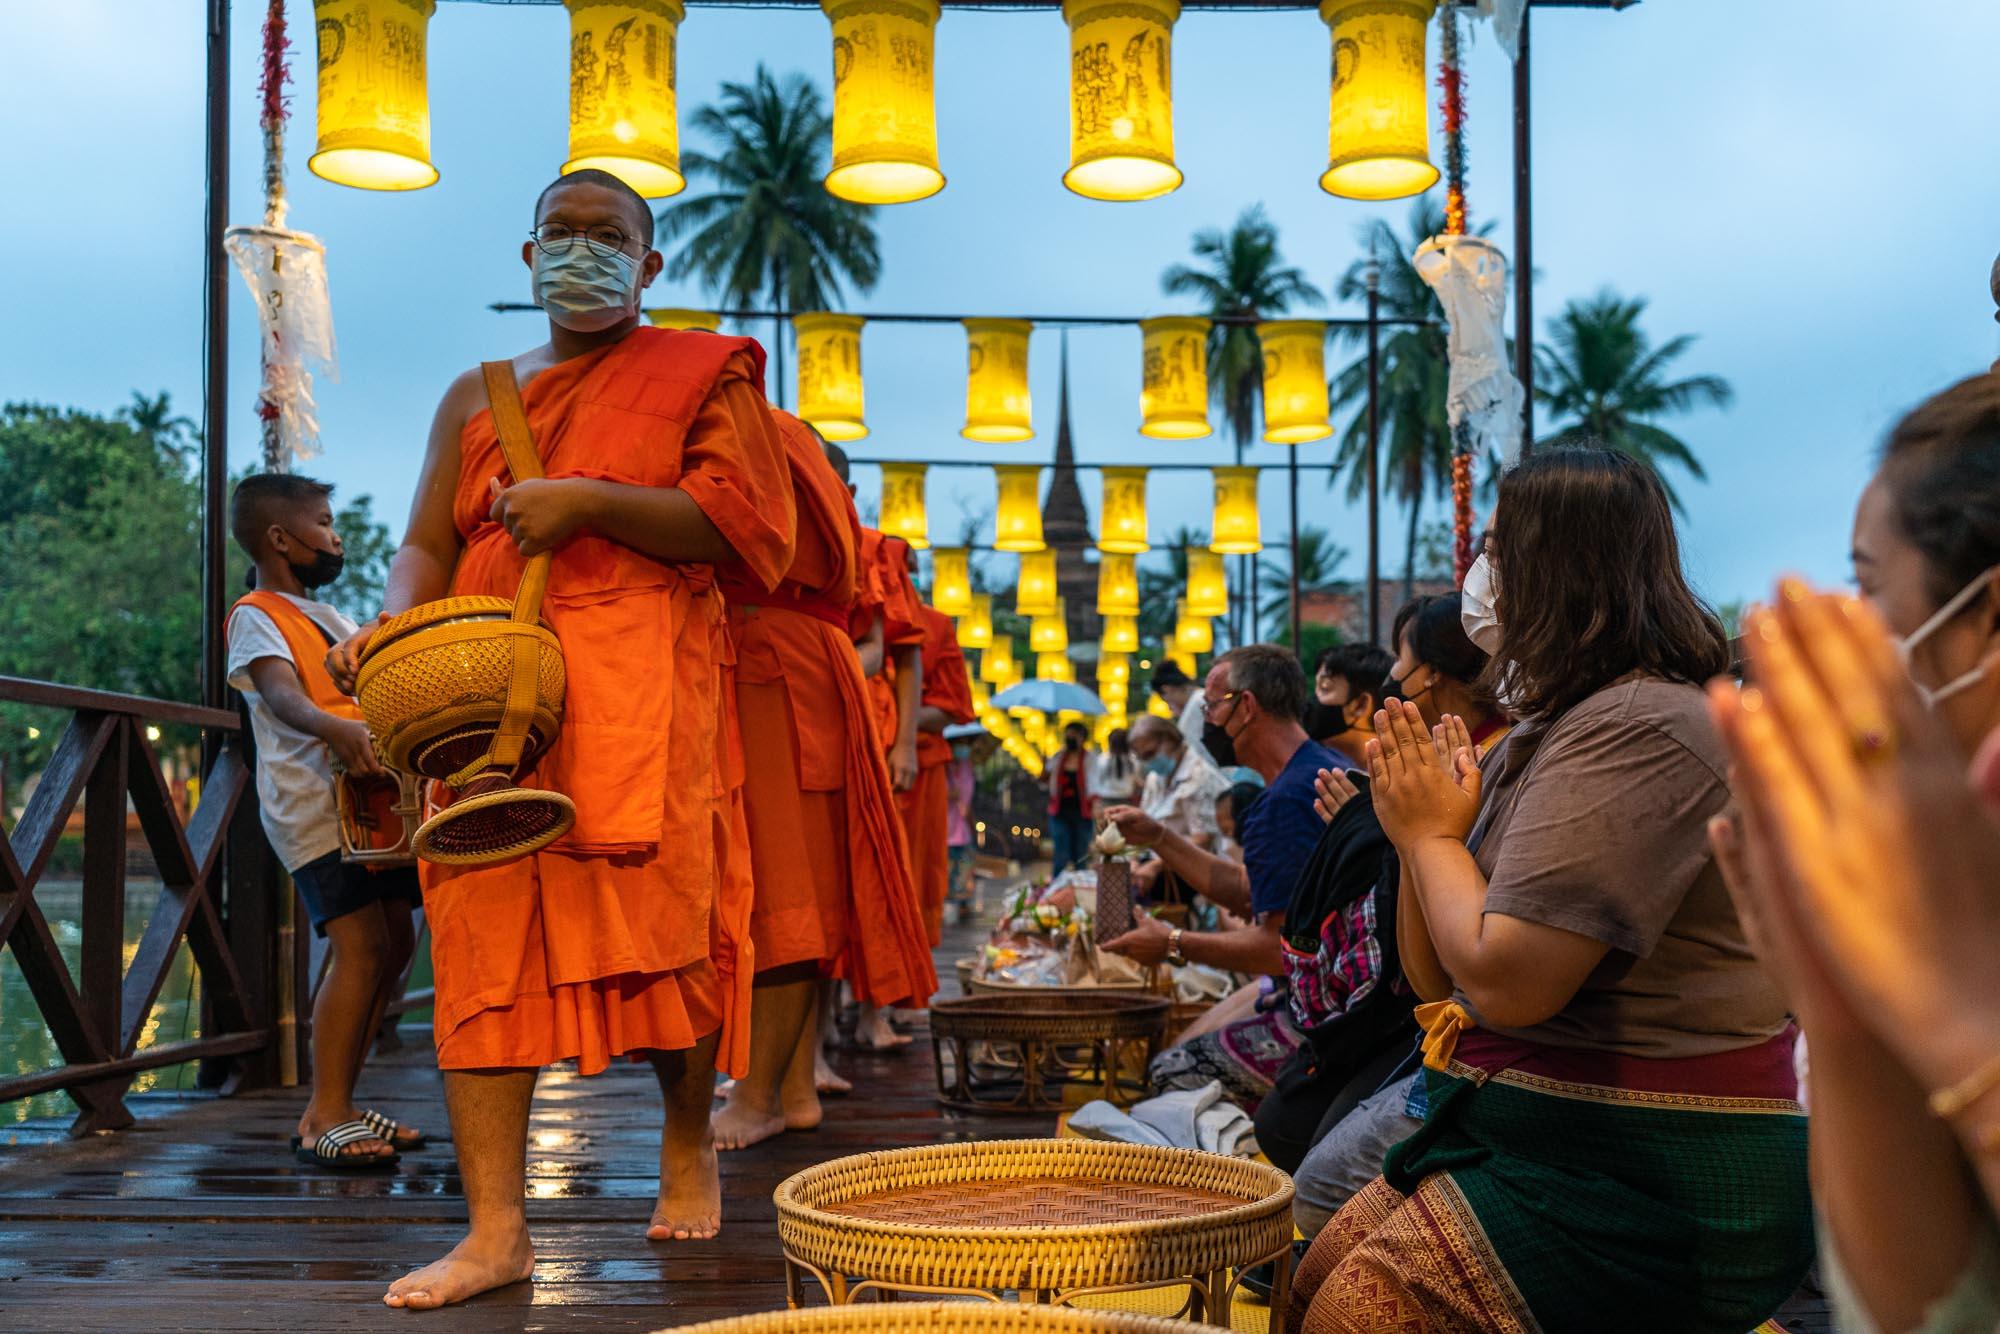 Monks receive offerings at the daily alms-giving ceremony at Wat Traphang Thong in Sukhothai. – © Michael Turtle